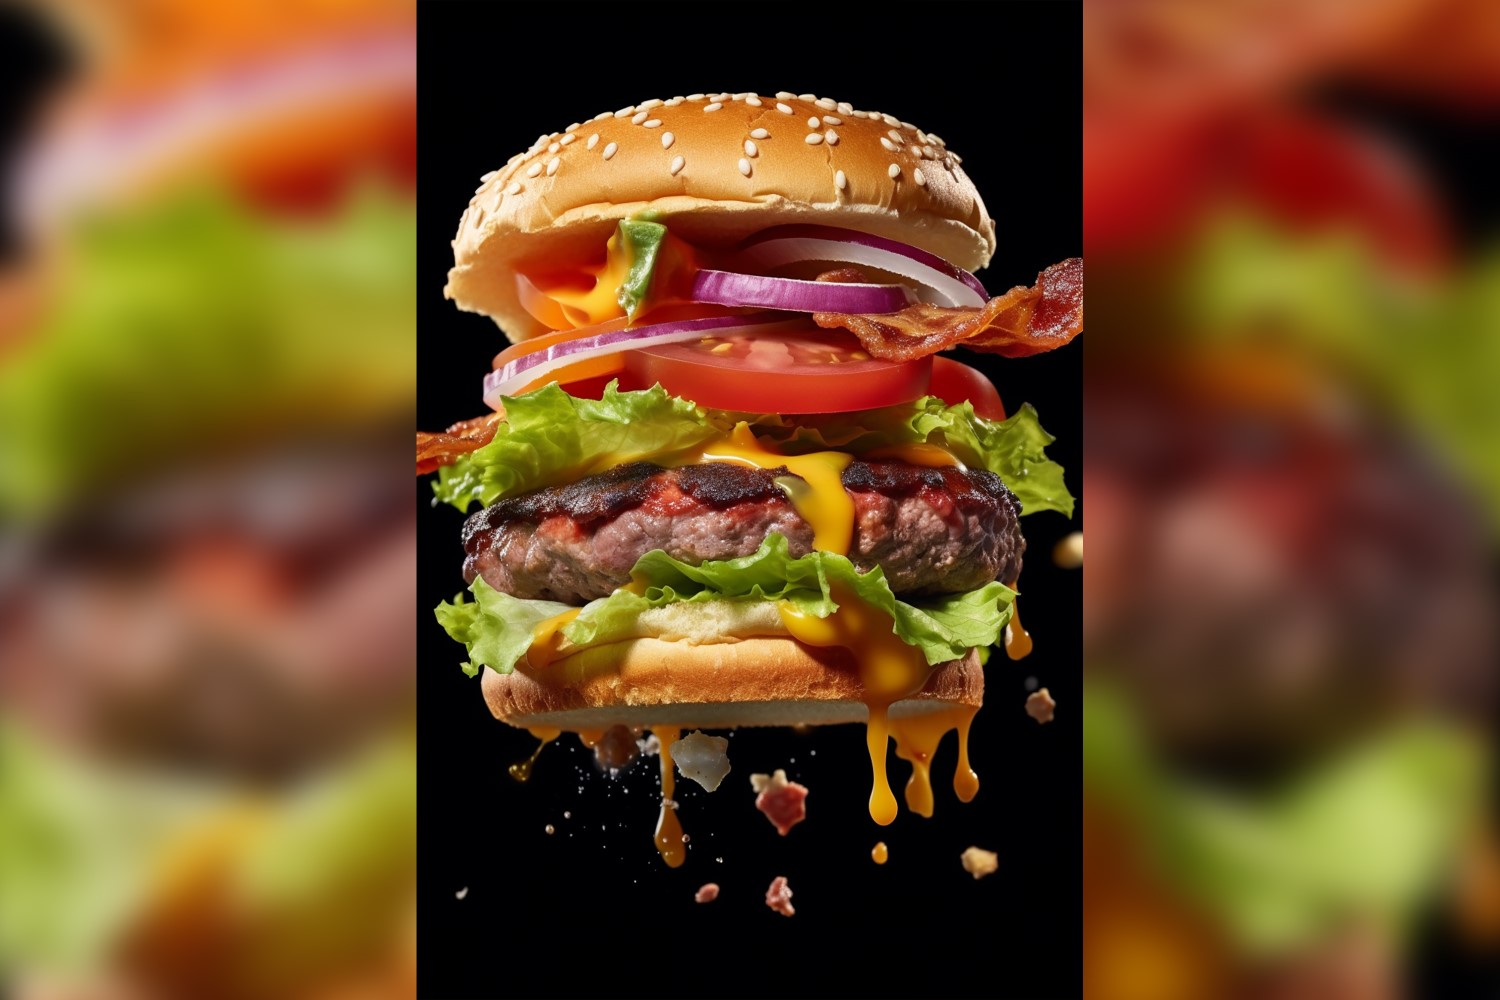 Bacon burger with beef patty and floating ingredients 59